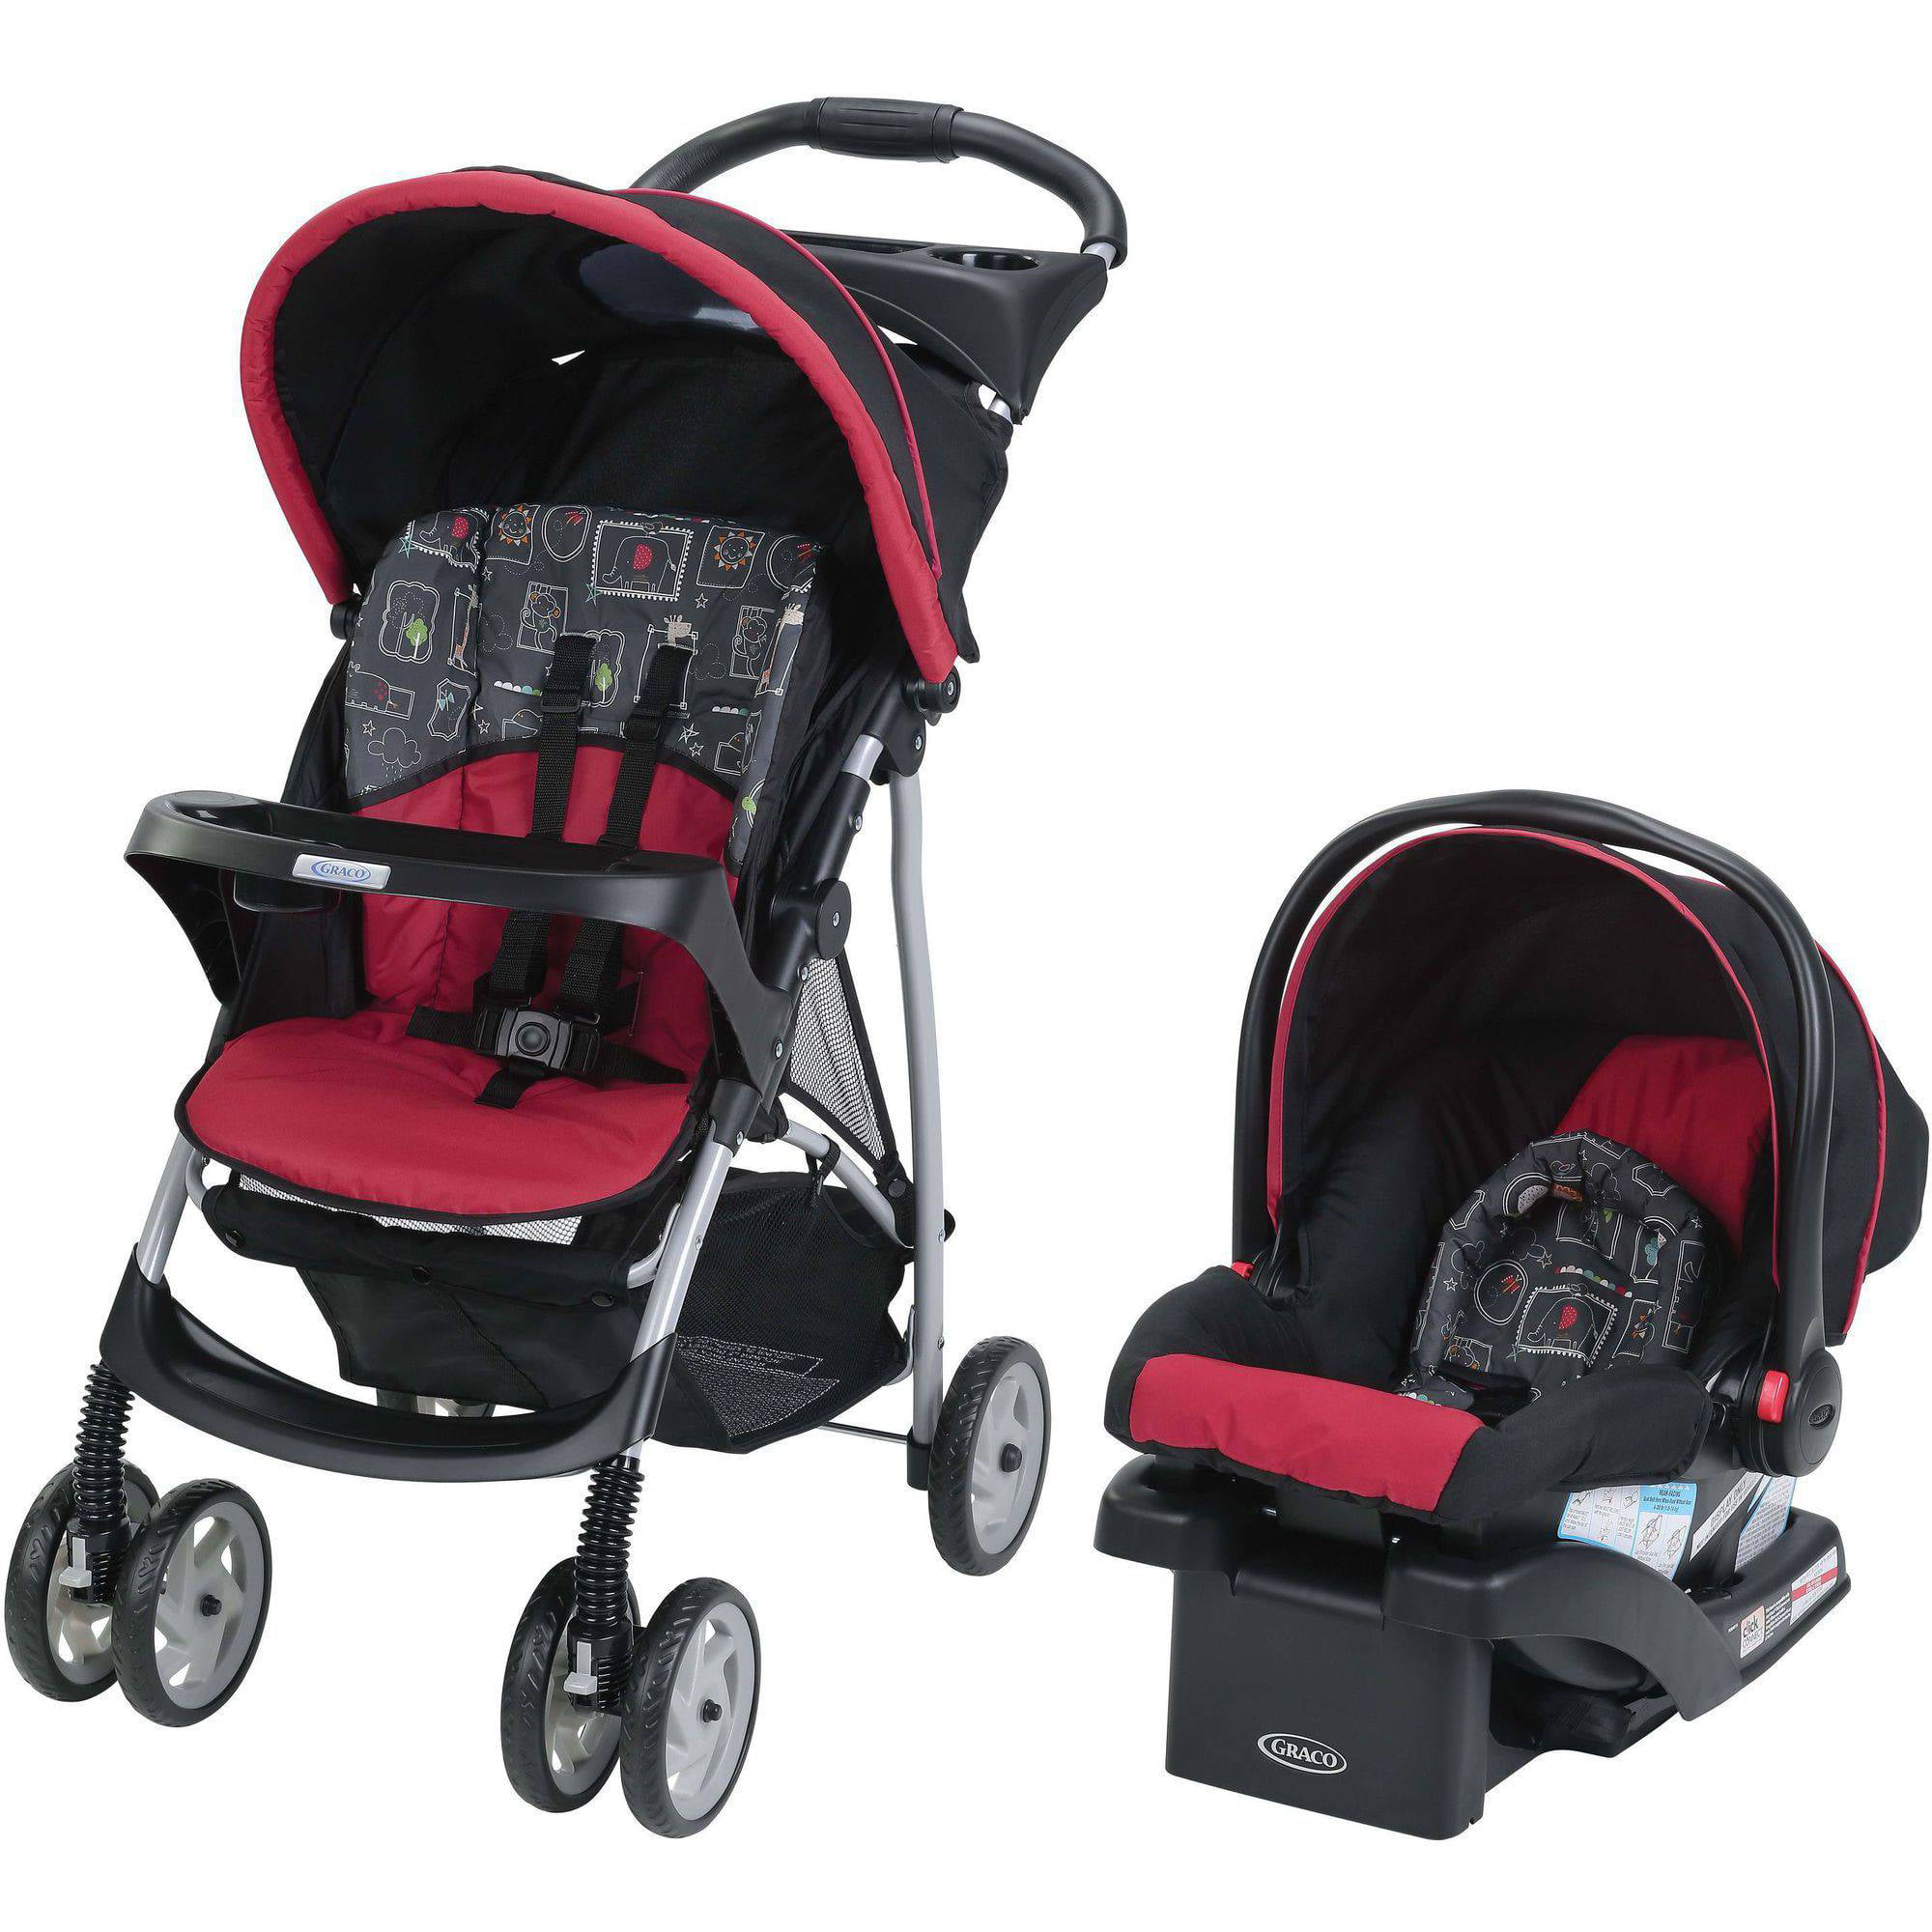 graco stroller and car seat walmart